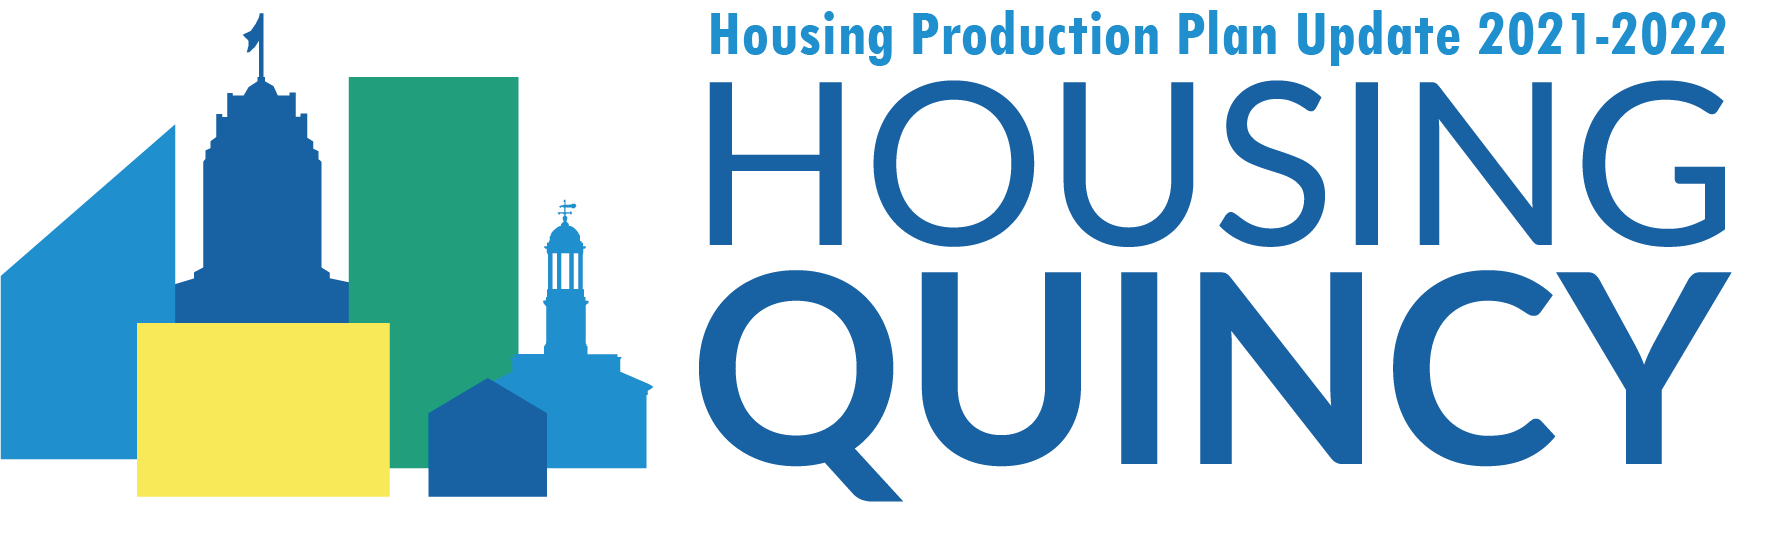 Housing Quincy Housing Production Plan Update 2021-2022